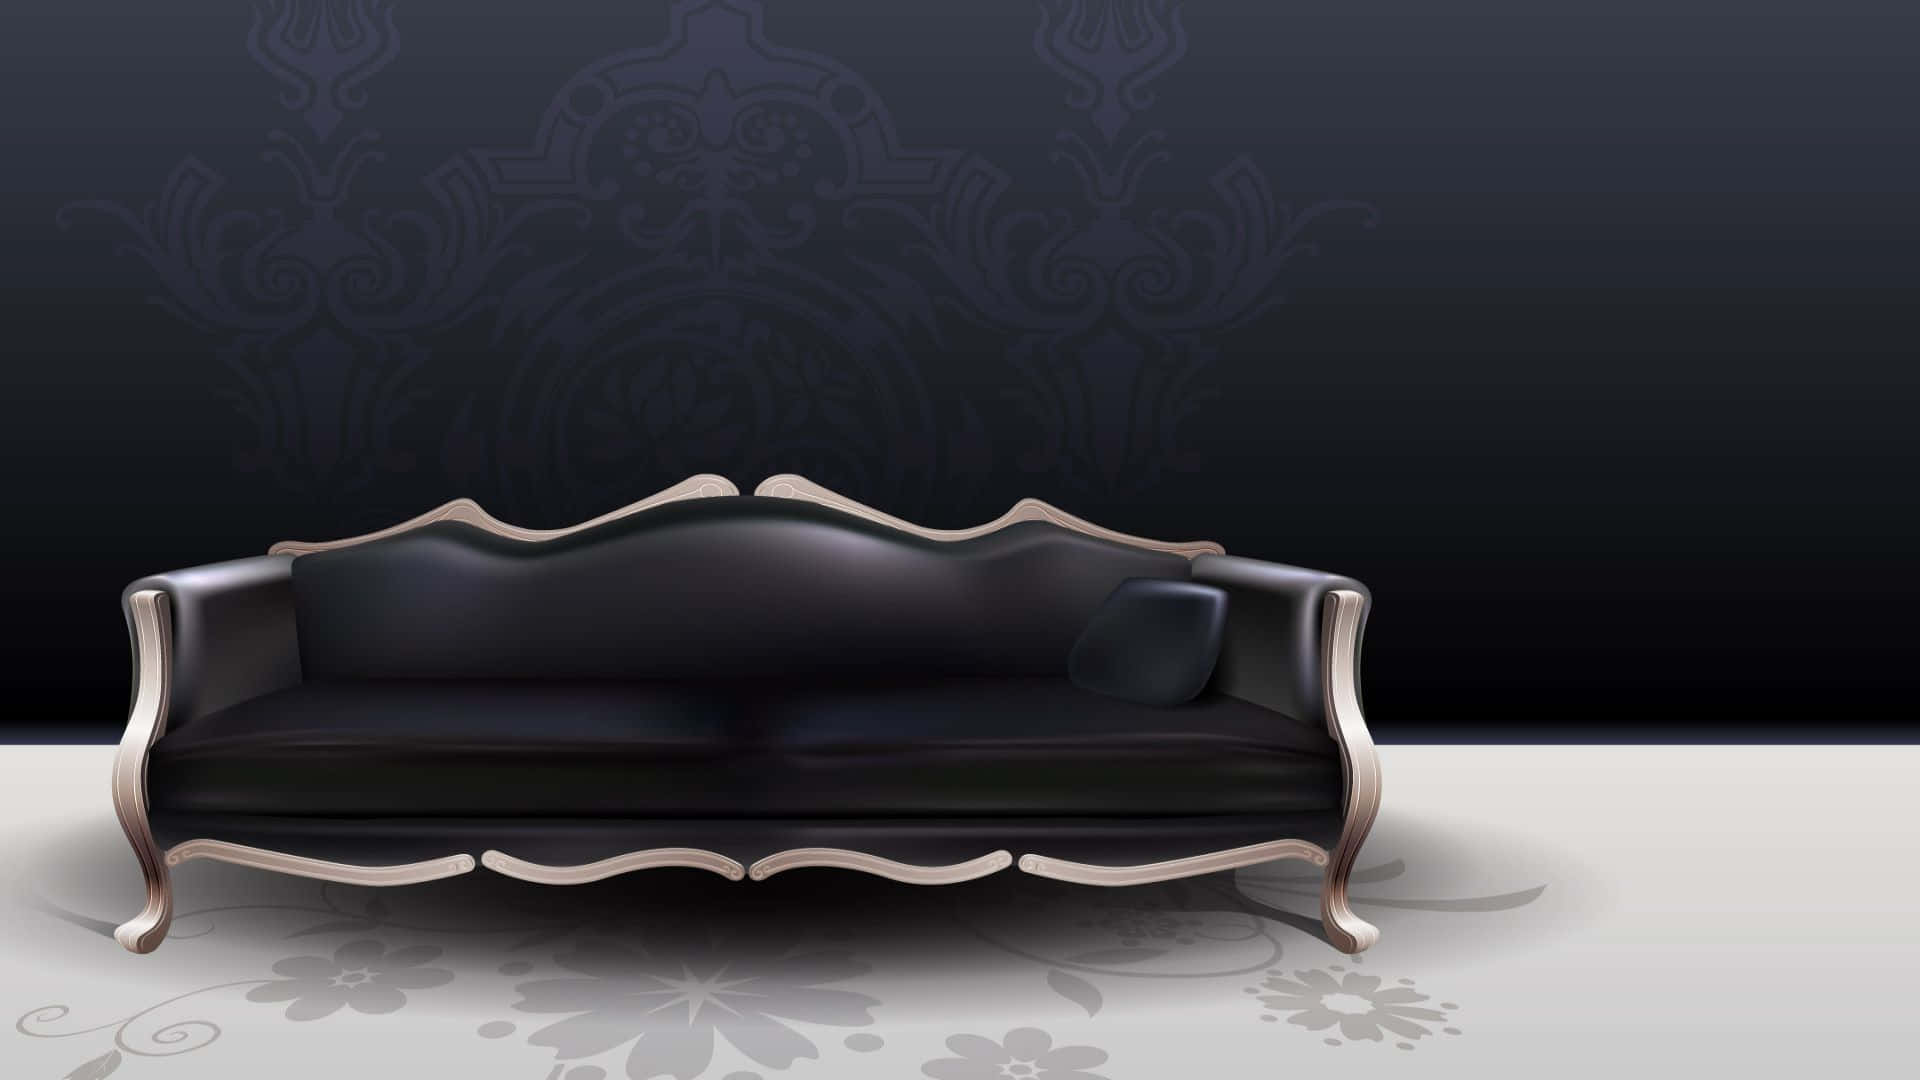 Luxurious Pitch Black Couch Design Wallpaper